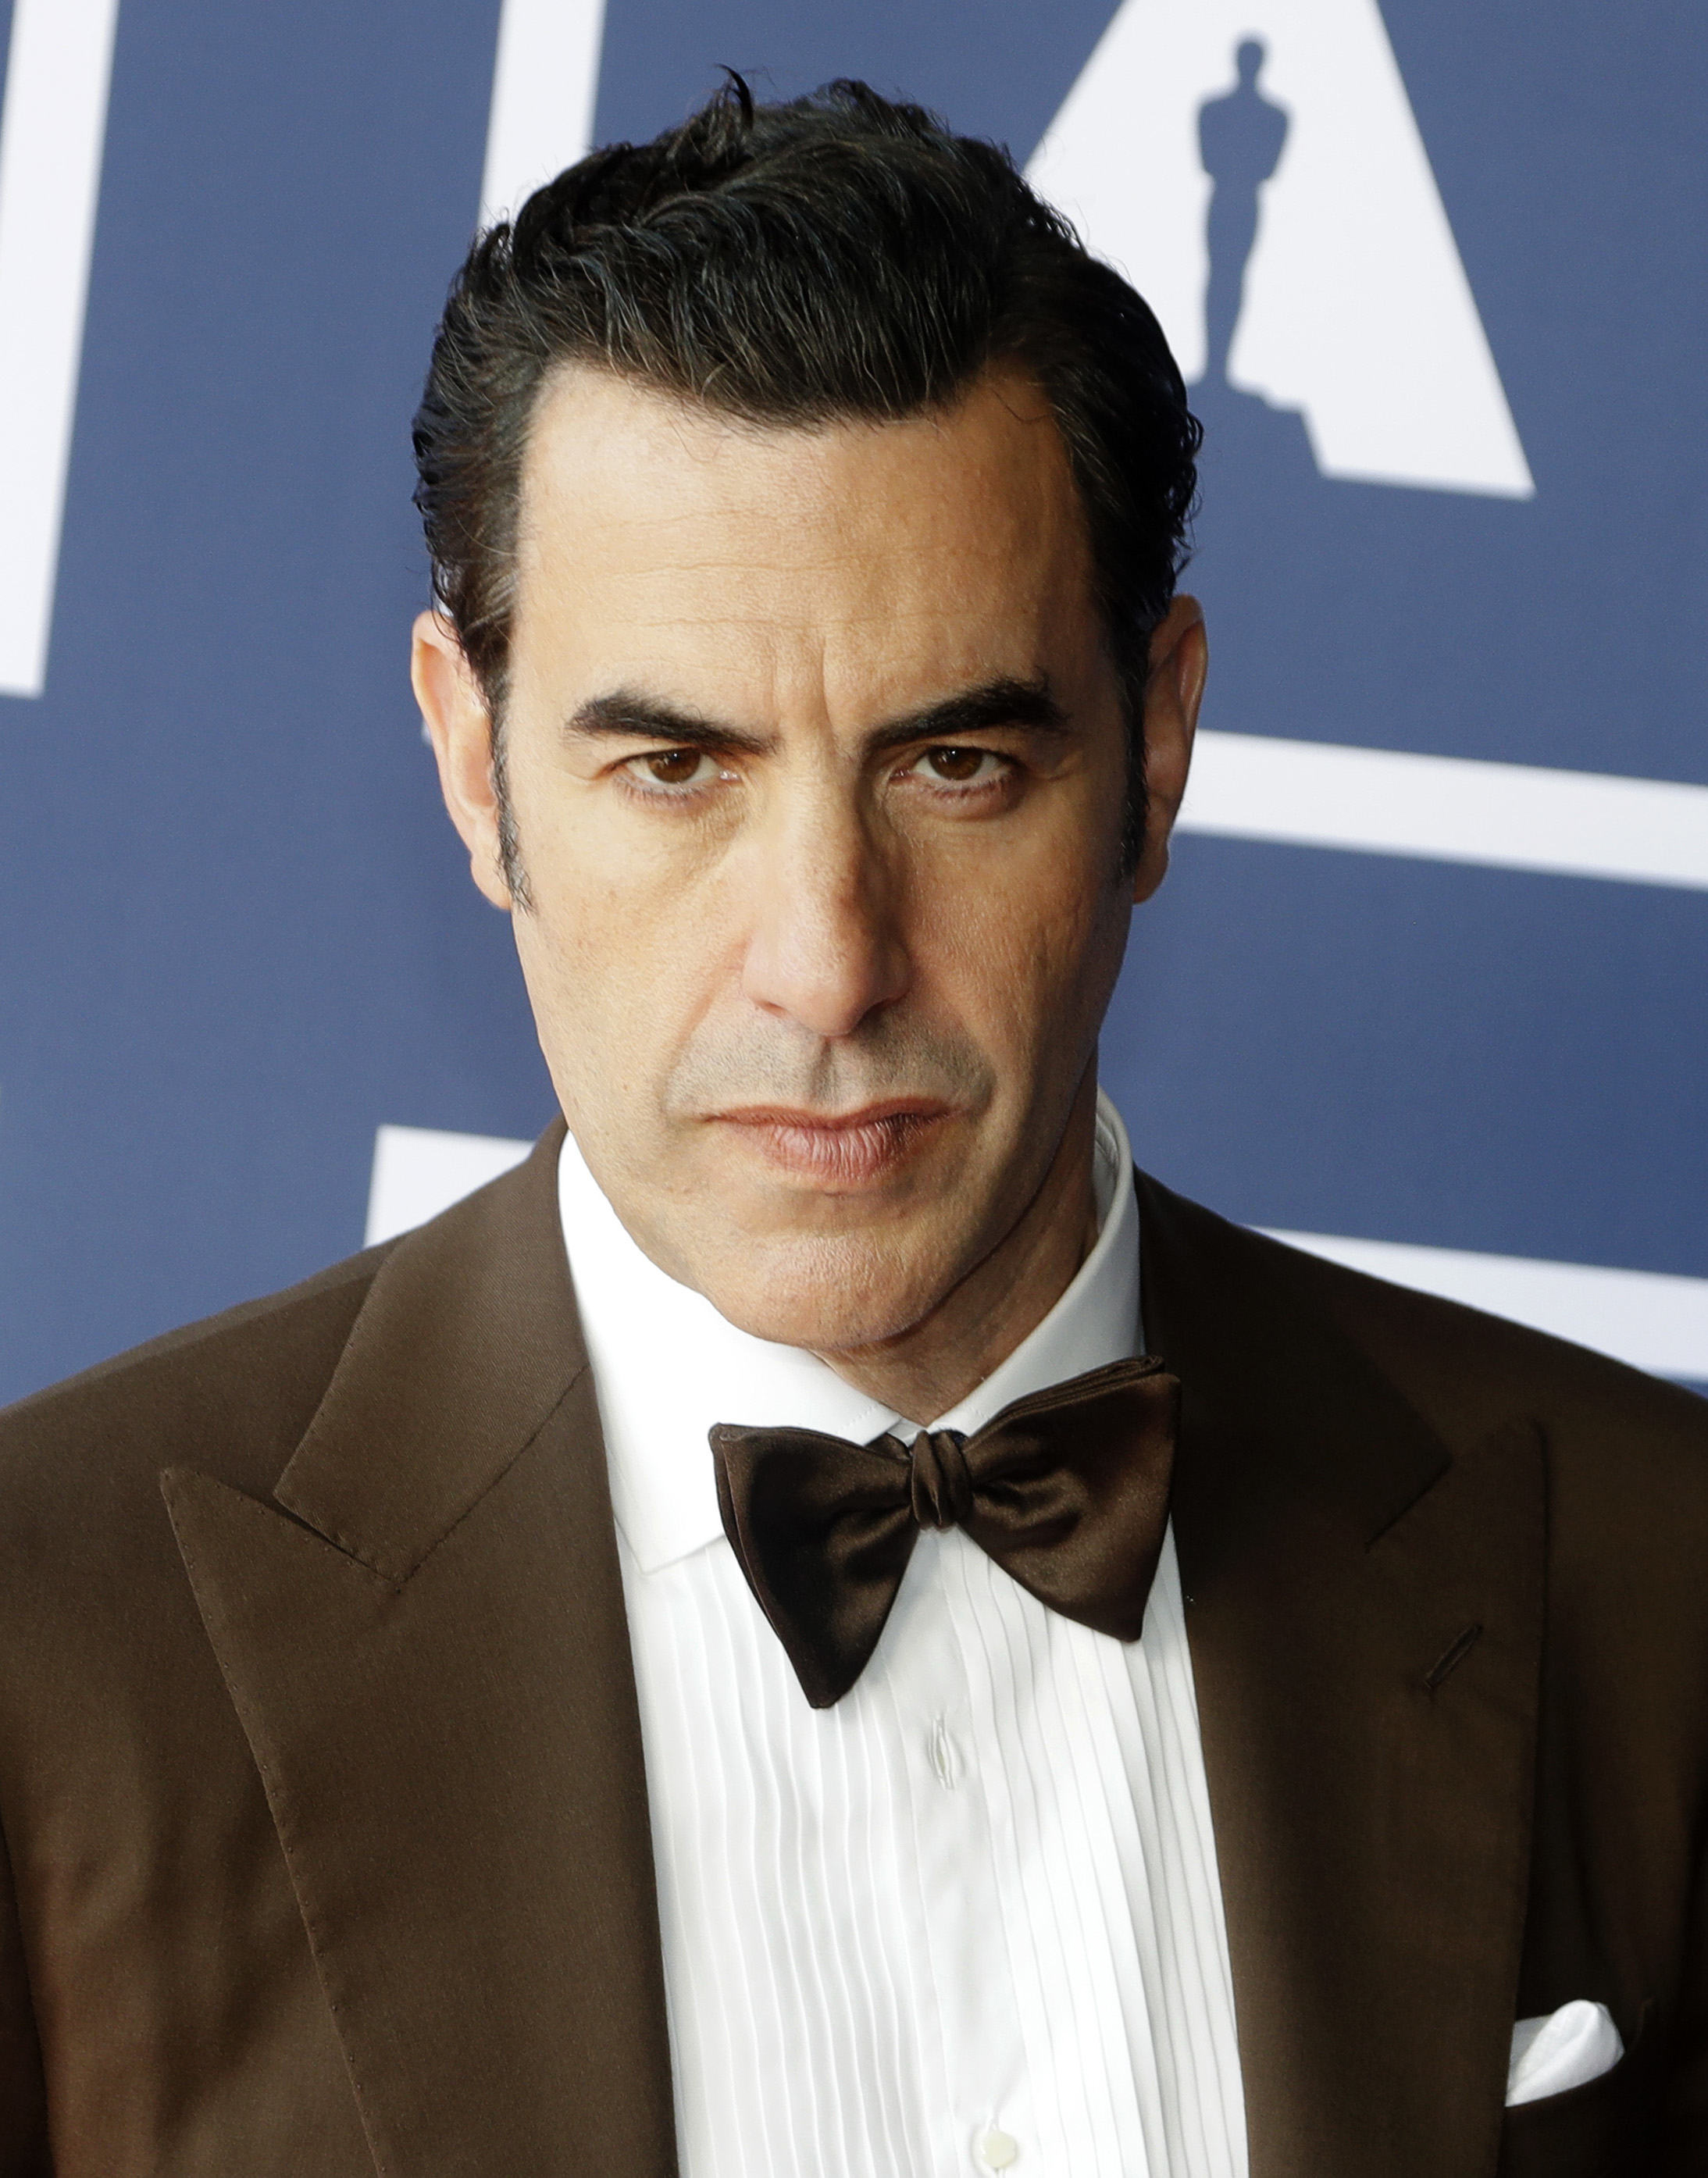 Sacha Baron Cohen in a brown suit and bow tie at an event